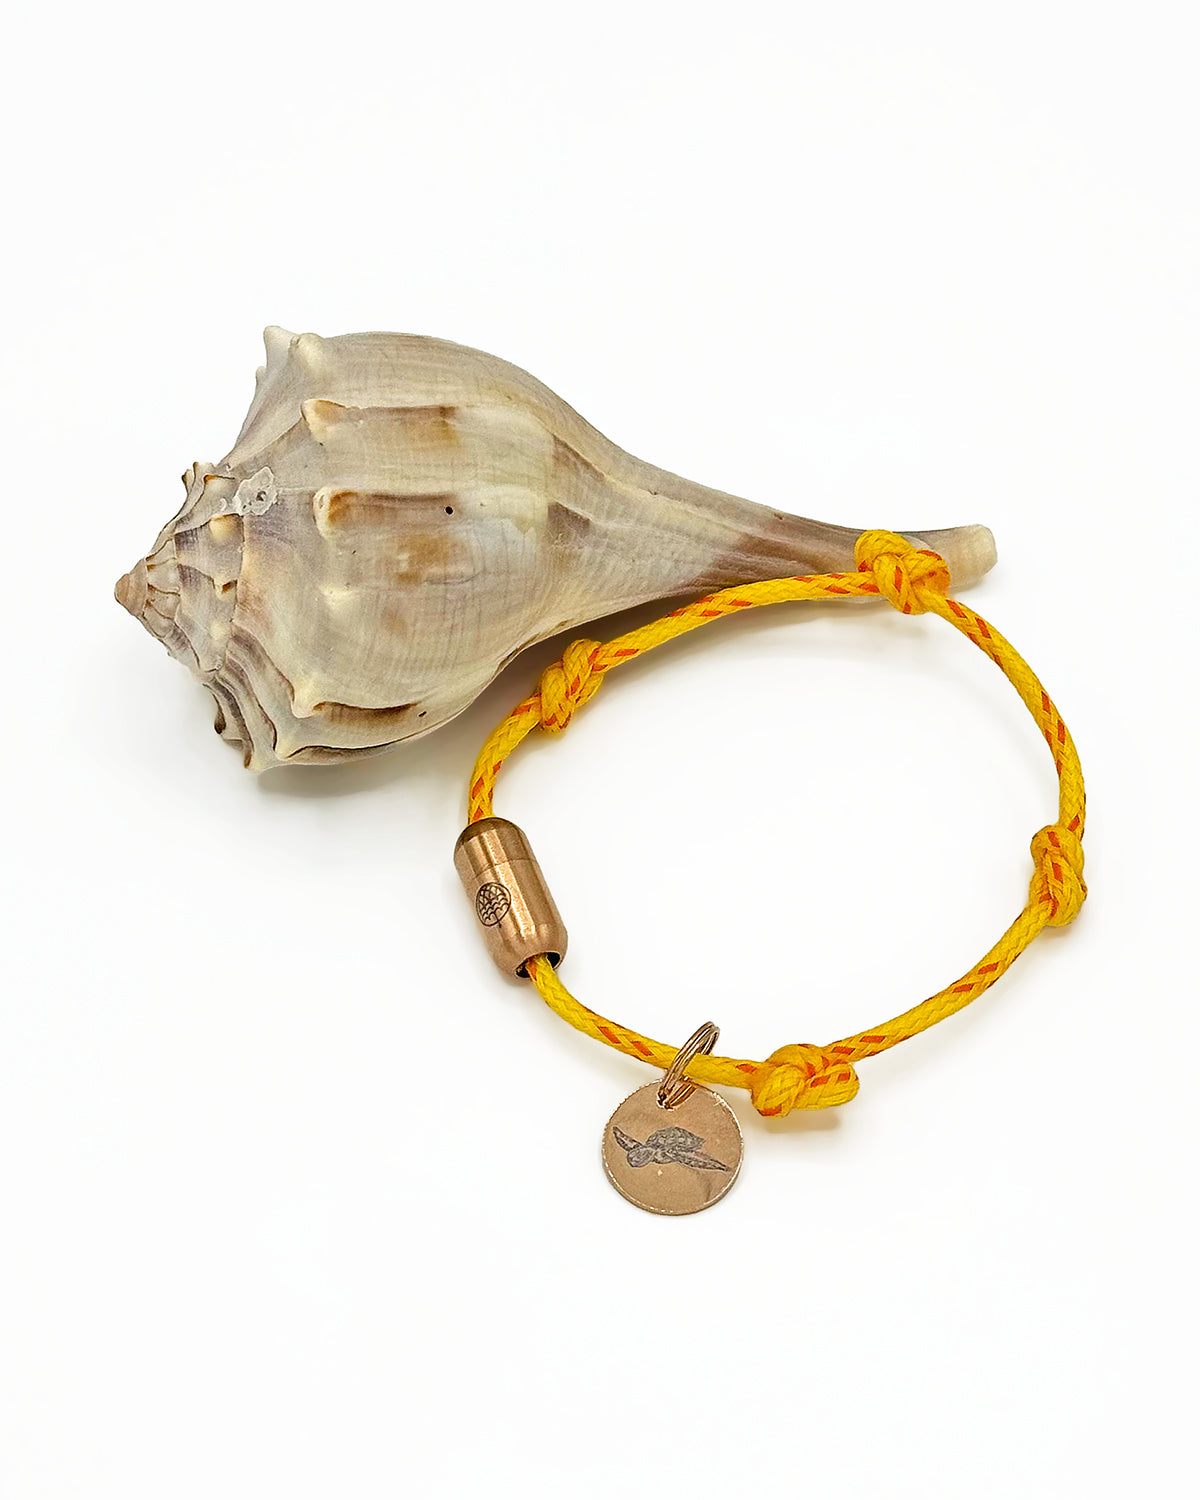 Bracelet in color yellow with red high lights, turtle pendant and a clasp in Roségold 